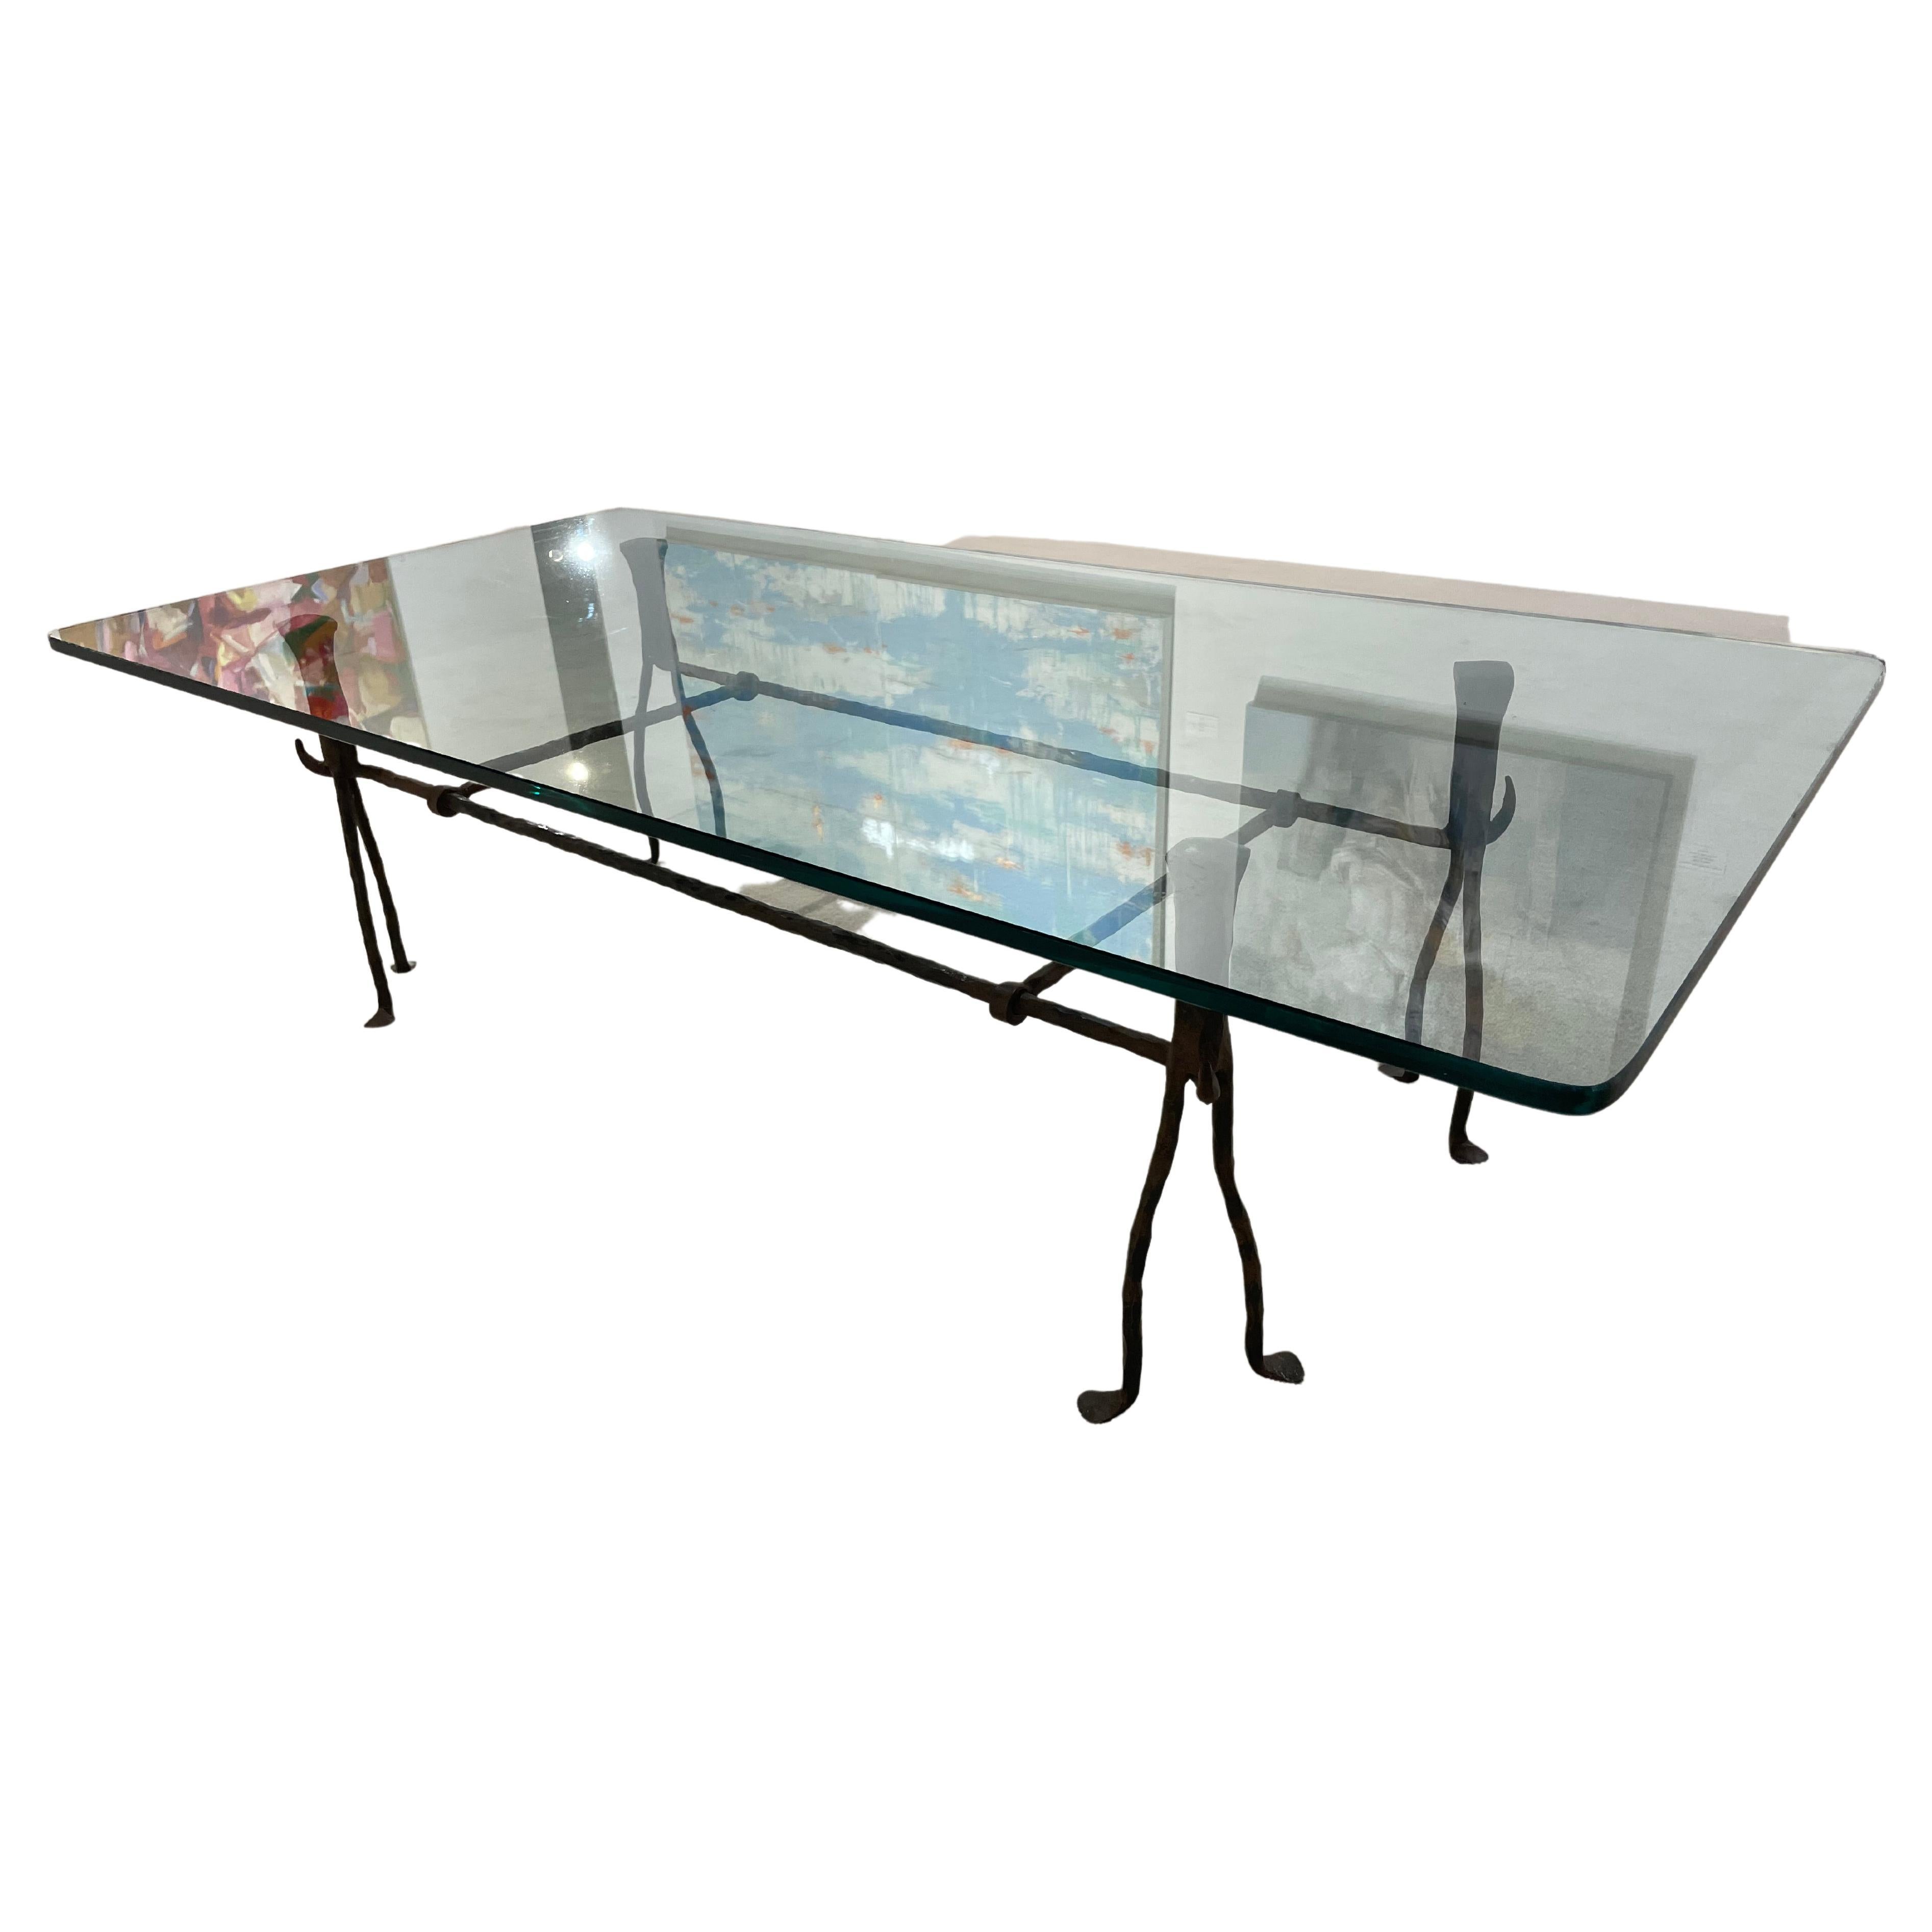 Elegant wrought iron table, and glass top. A very artistic work, which makes this table a work of character.